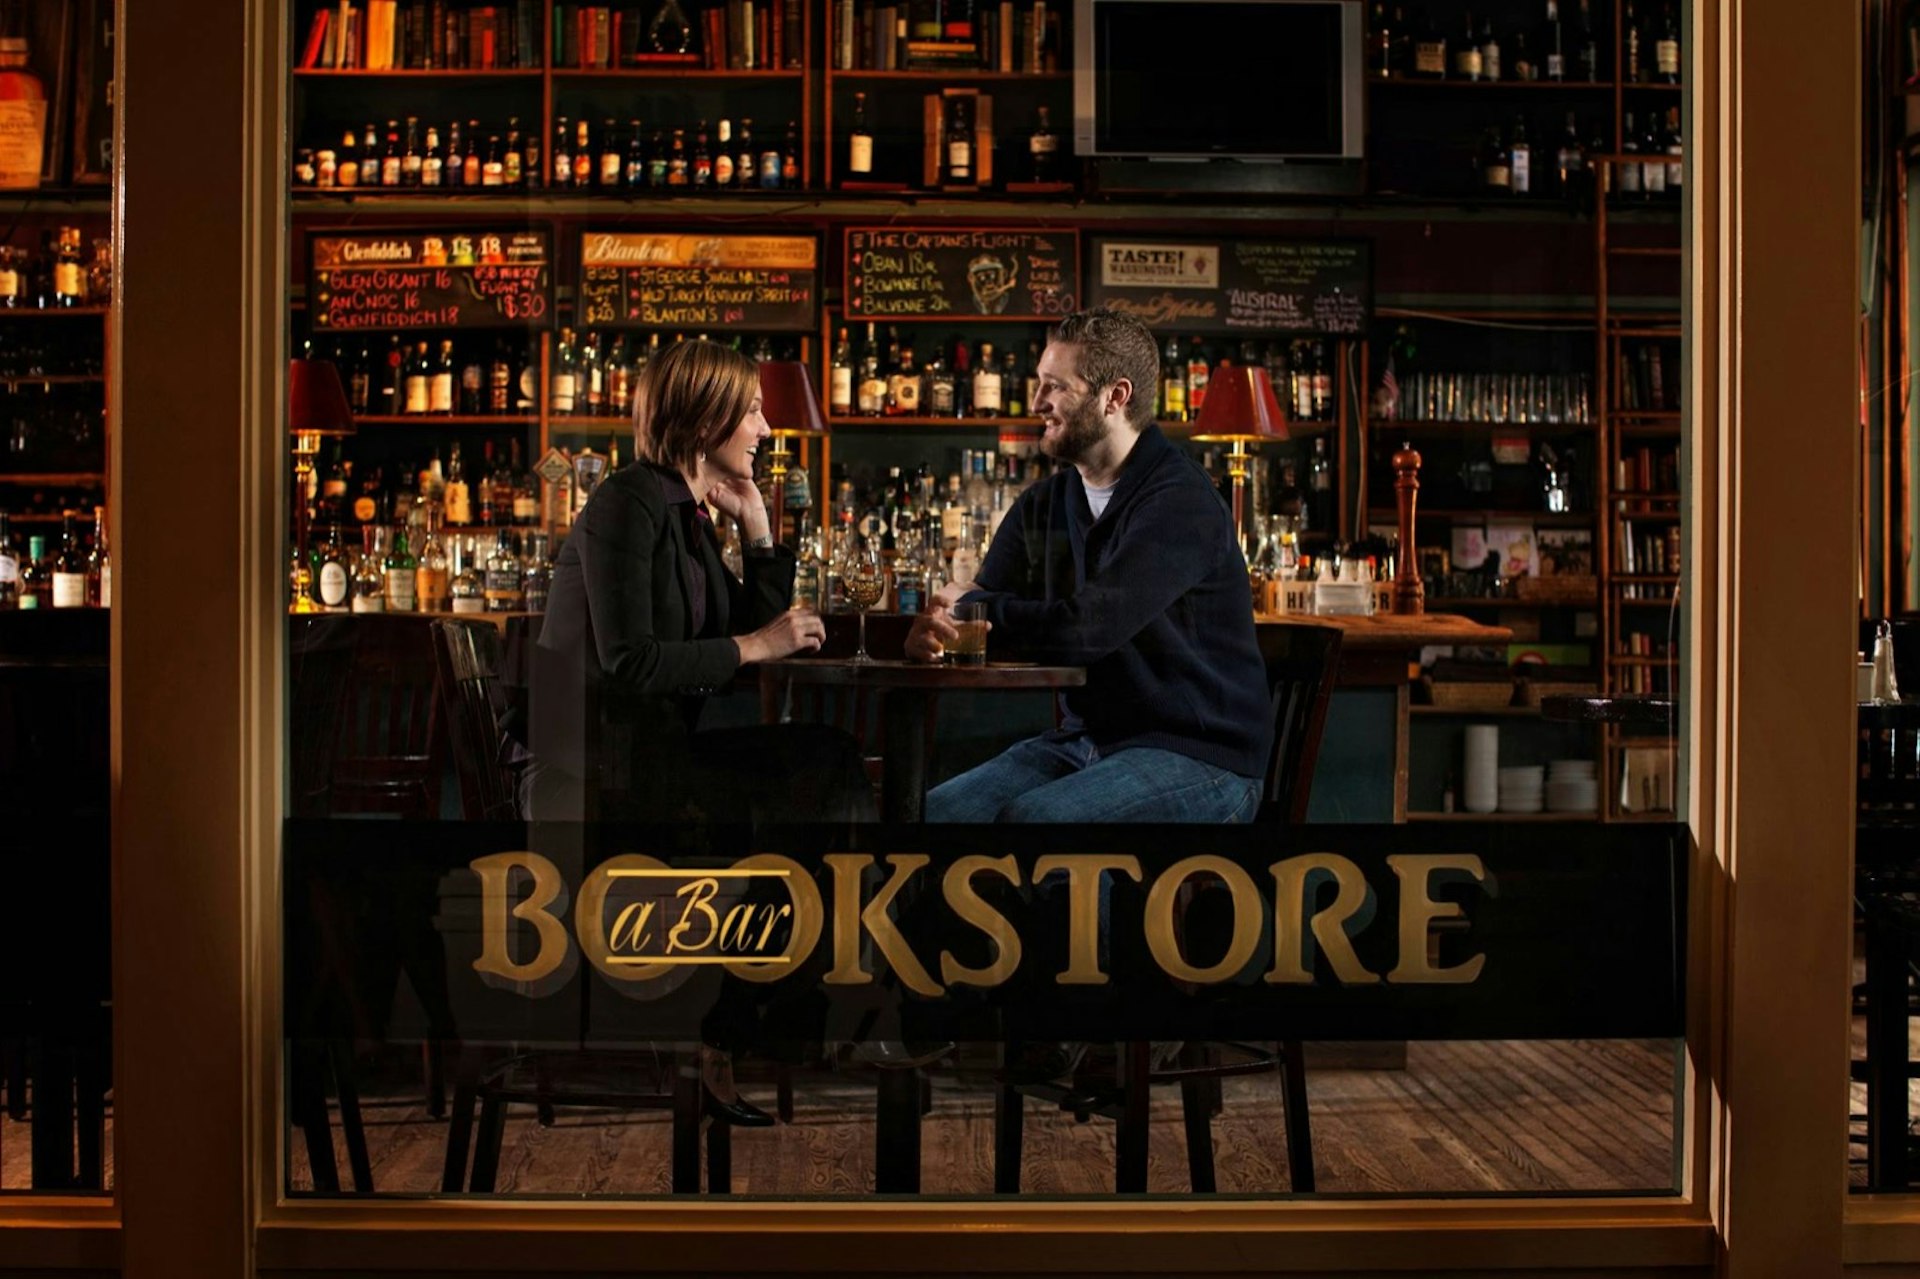 We see two people having drinks in a bar through the large front window, with the name Bookstore written on it. Perfect weekend in Seattle